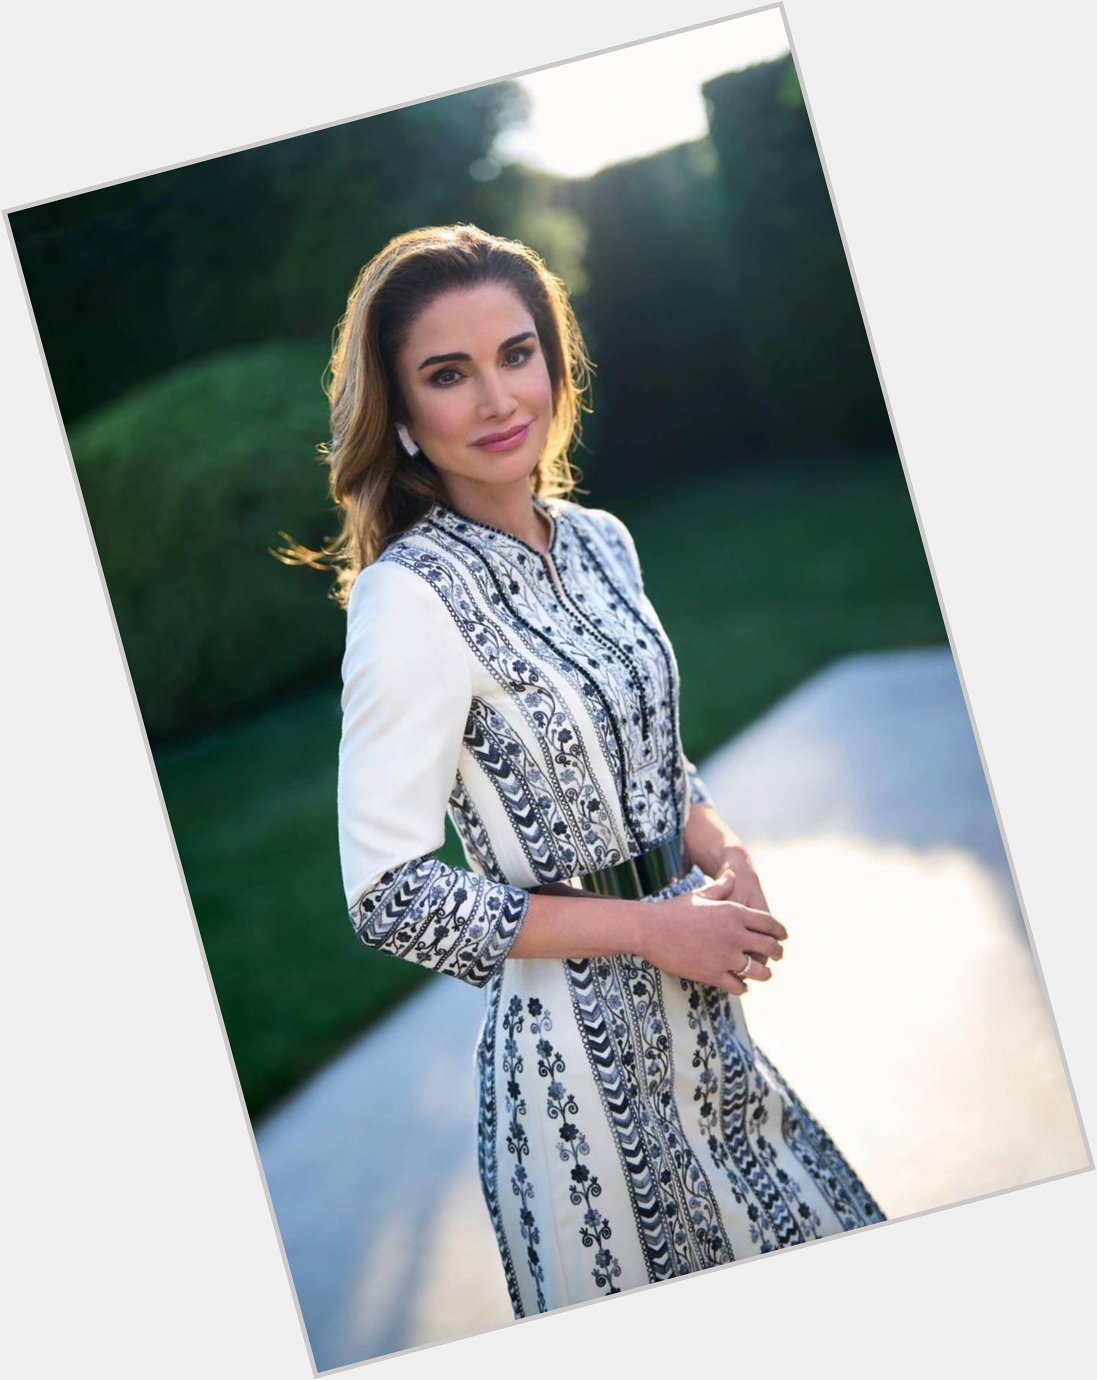 Happy 52nd bday to HM Queen Rania of Jordan! Long may she reign 